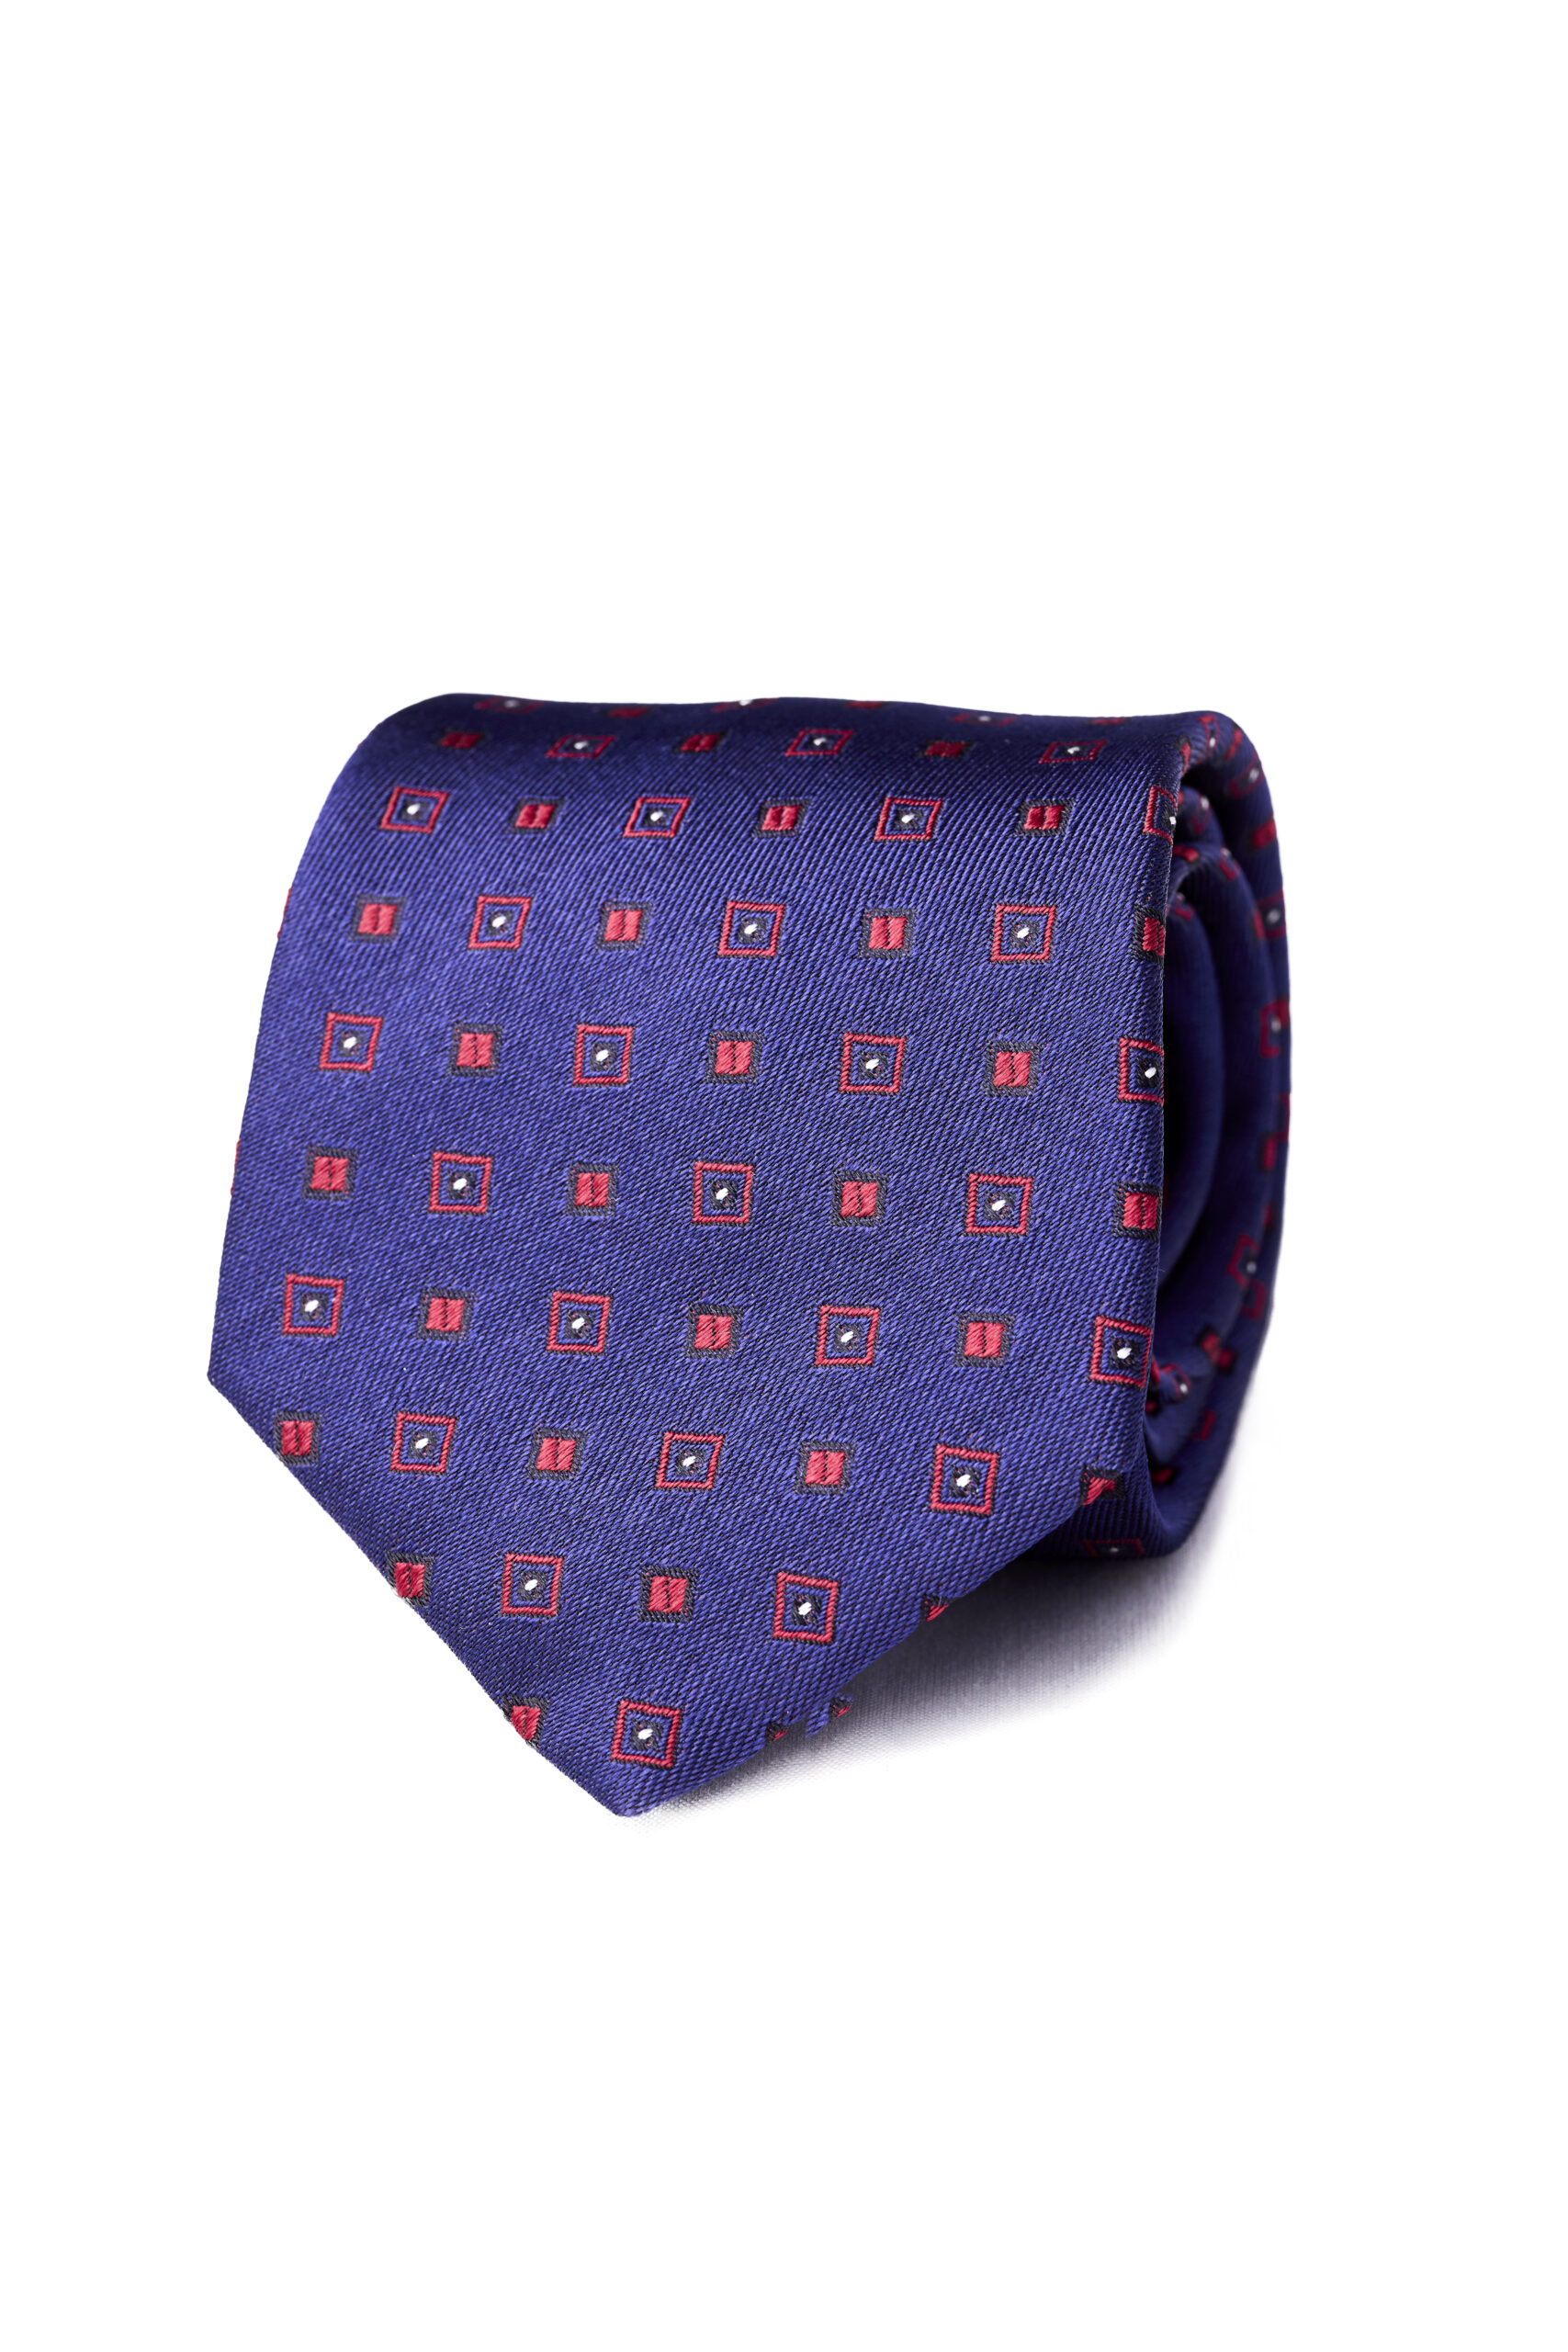 A blue tie with red squares and dots on it